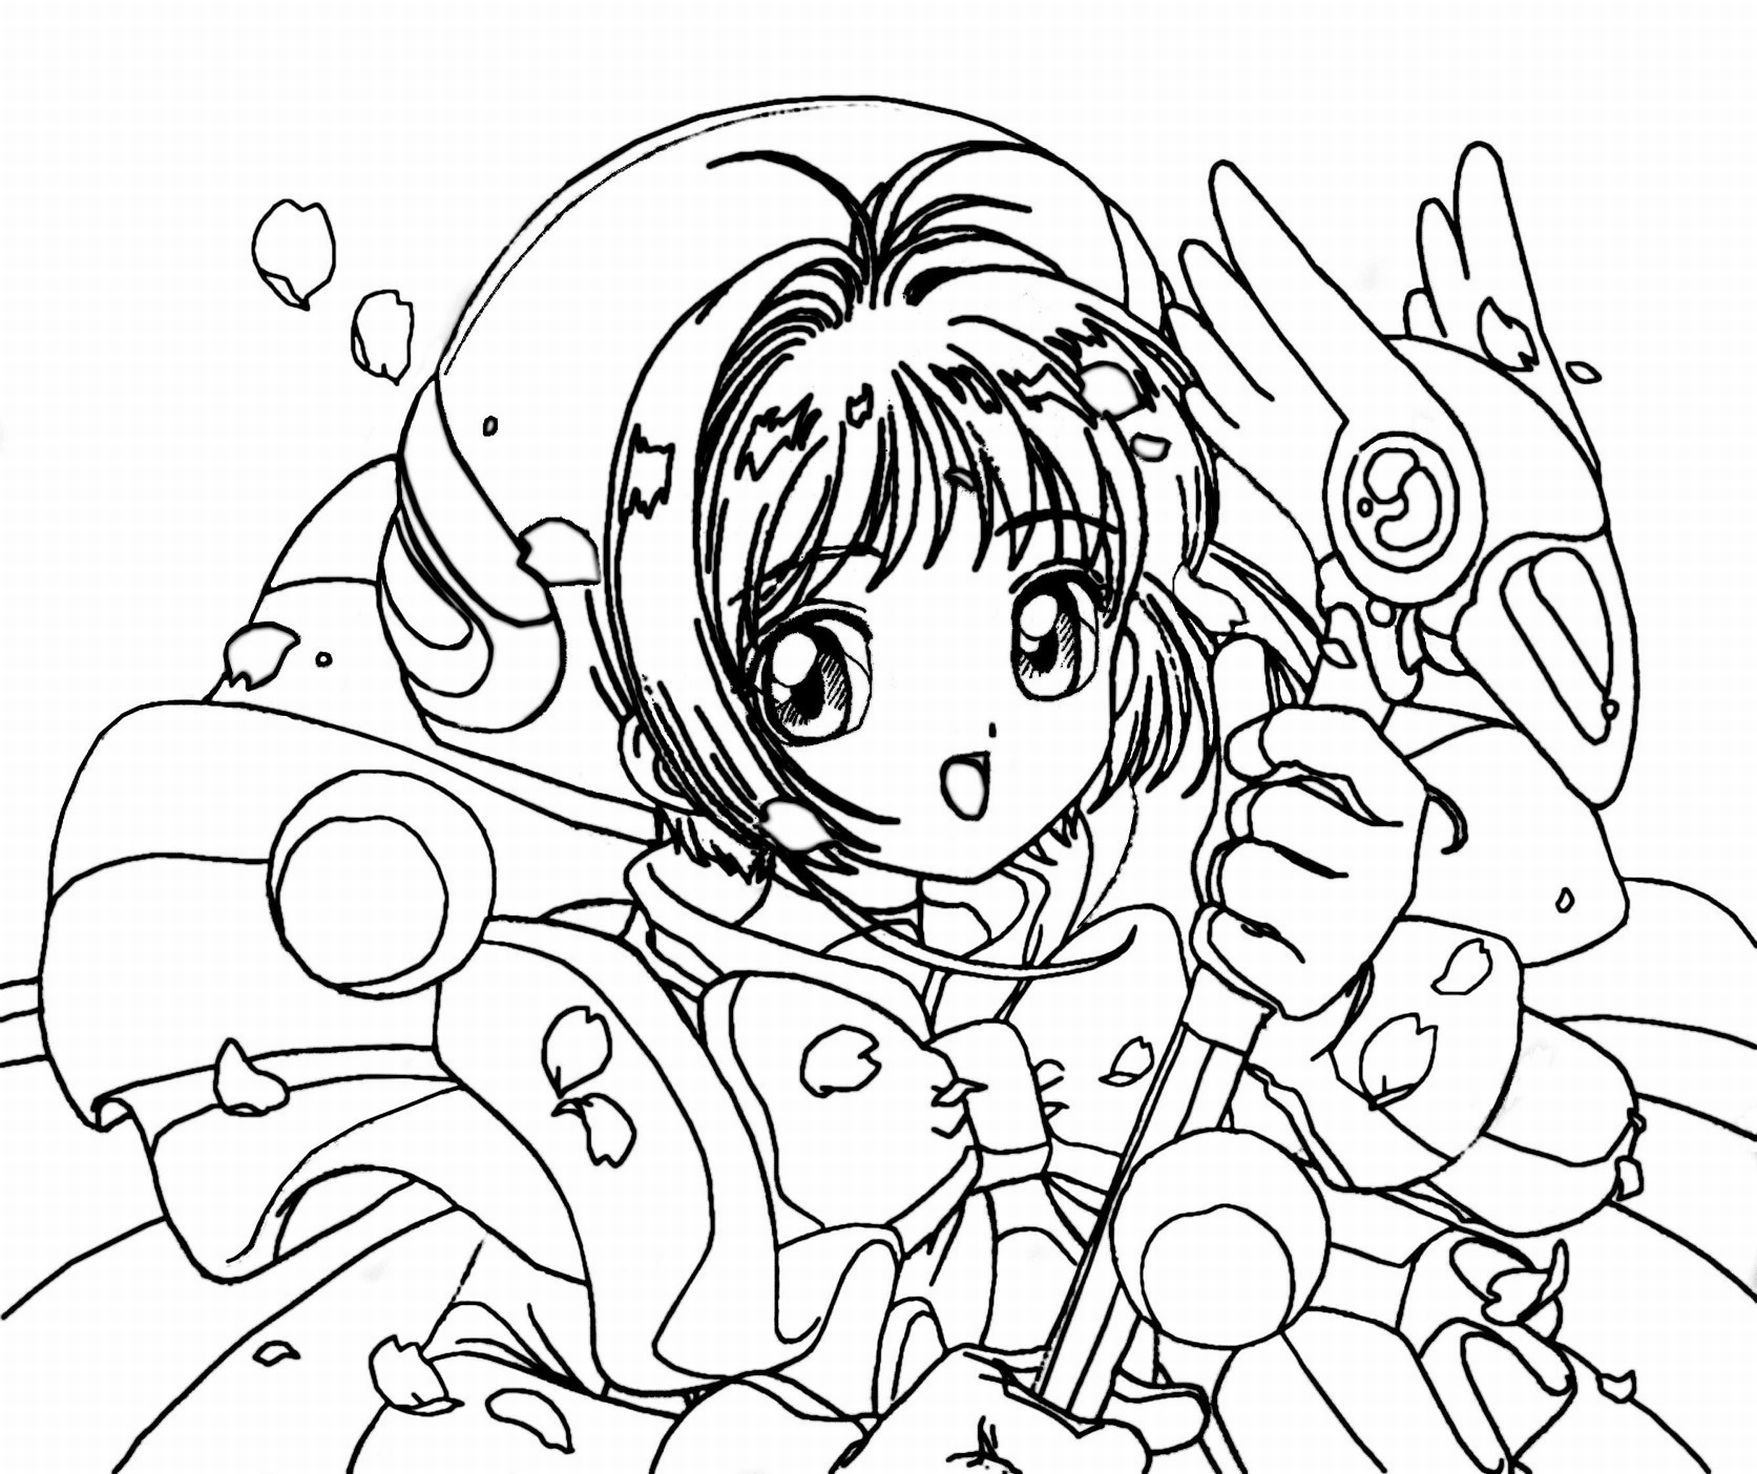 Anime To Print - Coloring Pages for Kids and for Adults